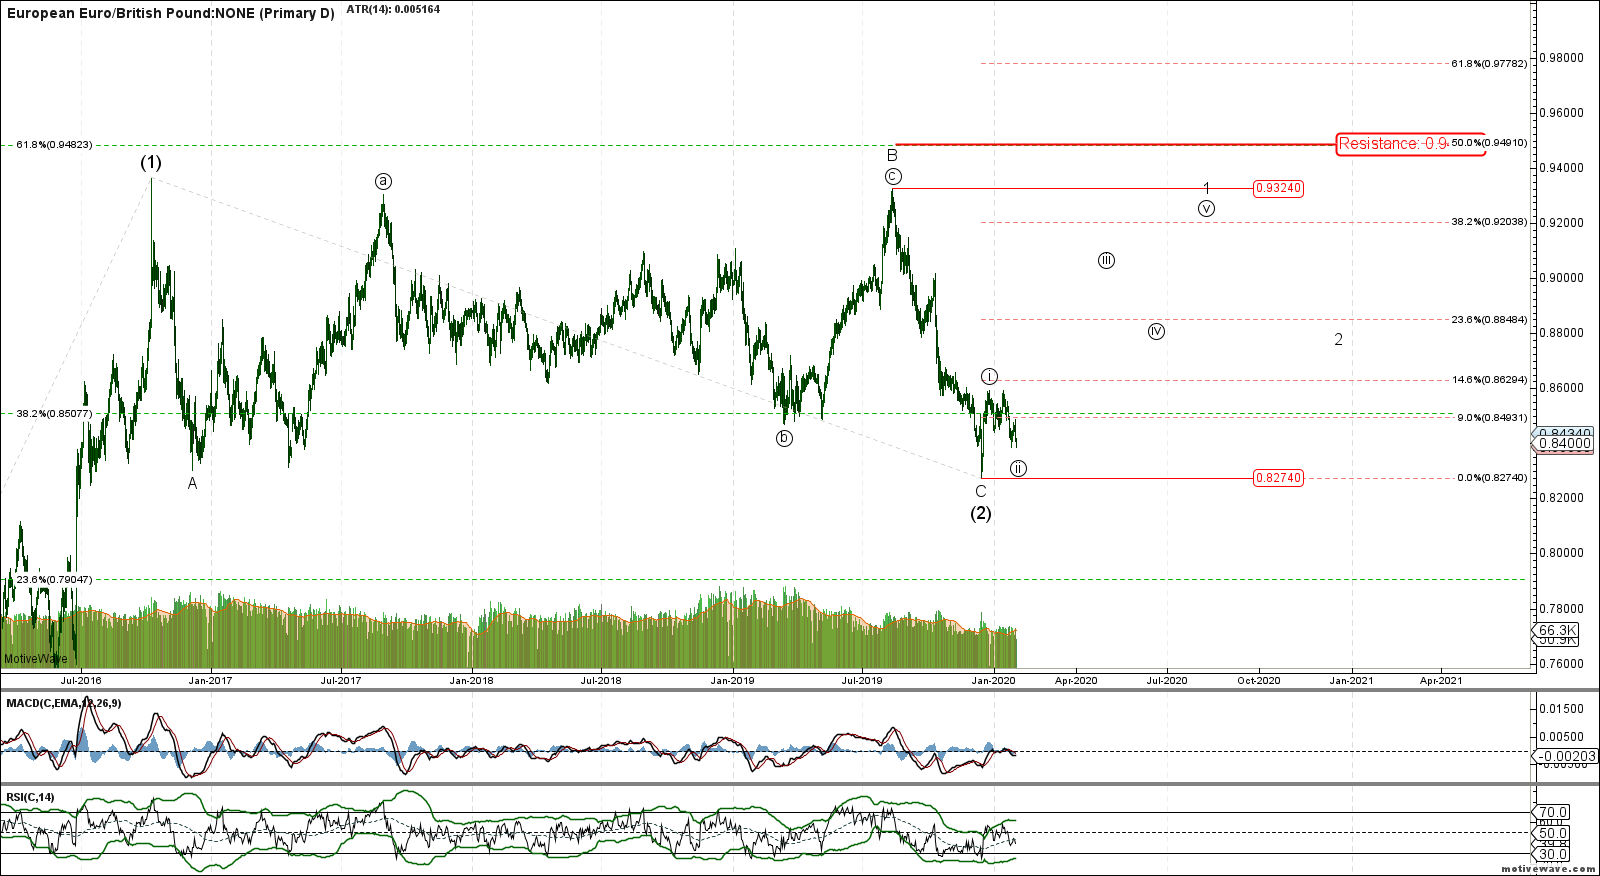 BaseCase - EURGBP= - Primary D - Jan-31 1344 PM (1 day)